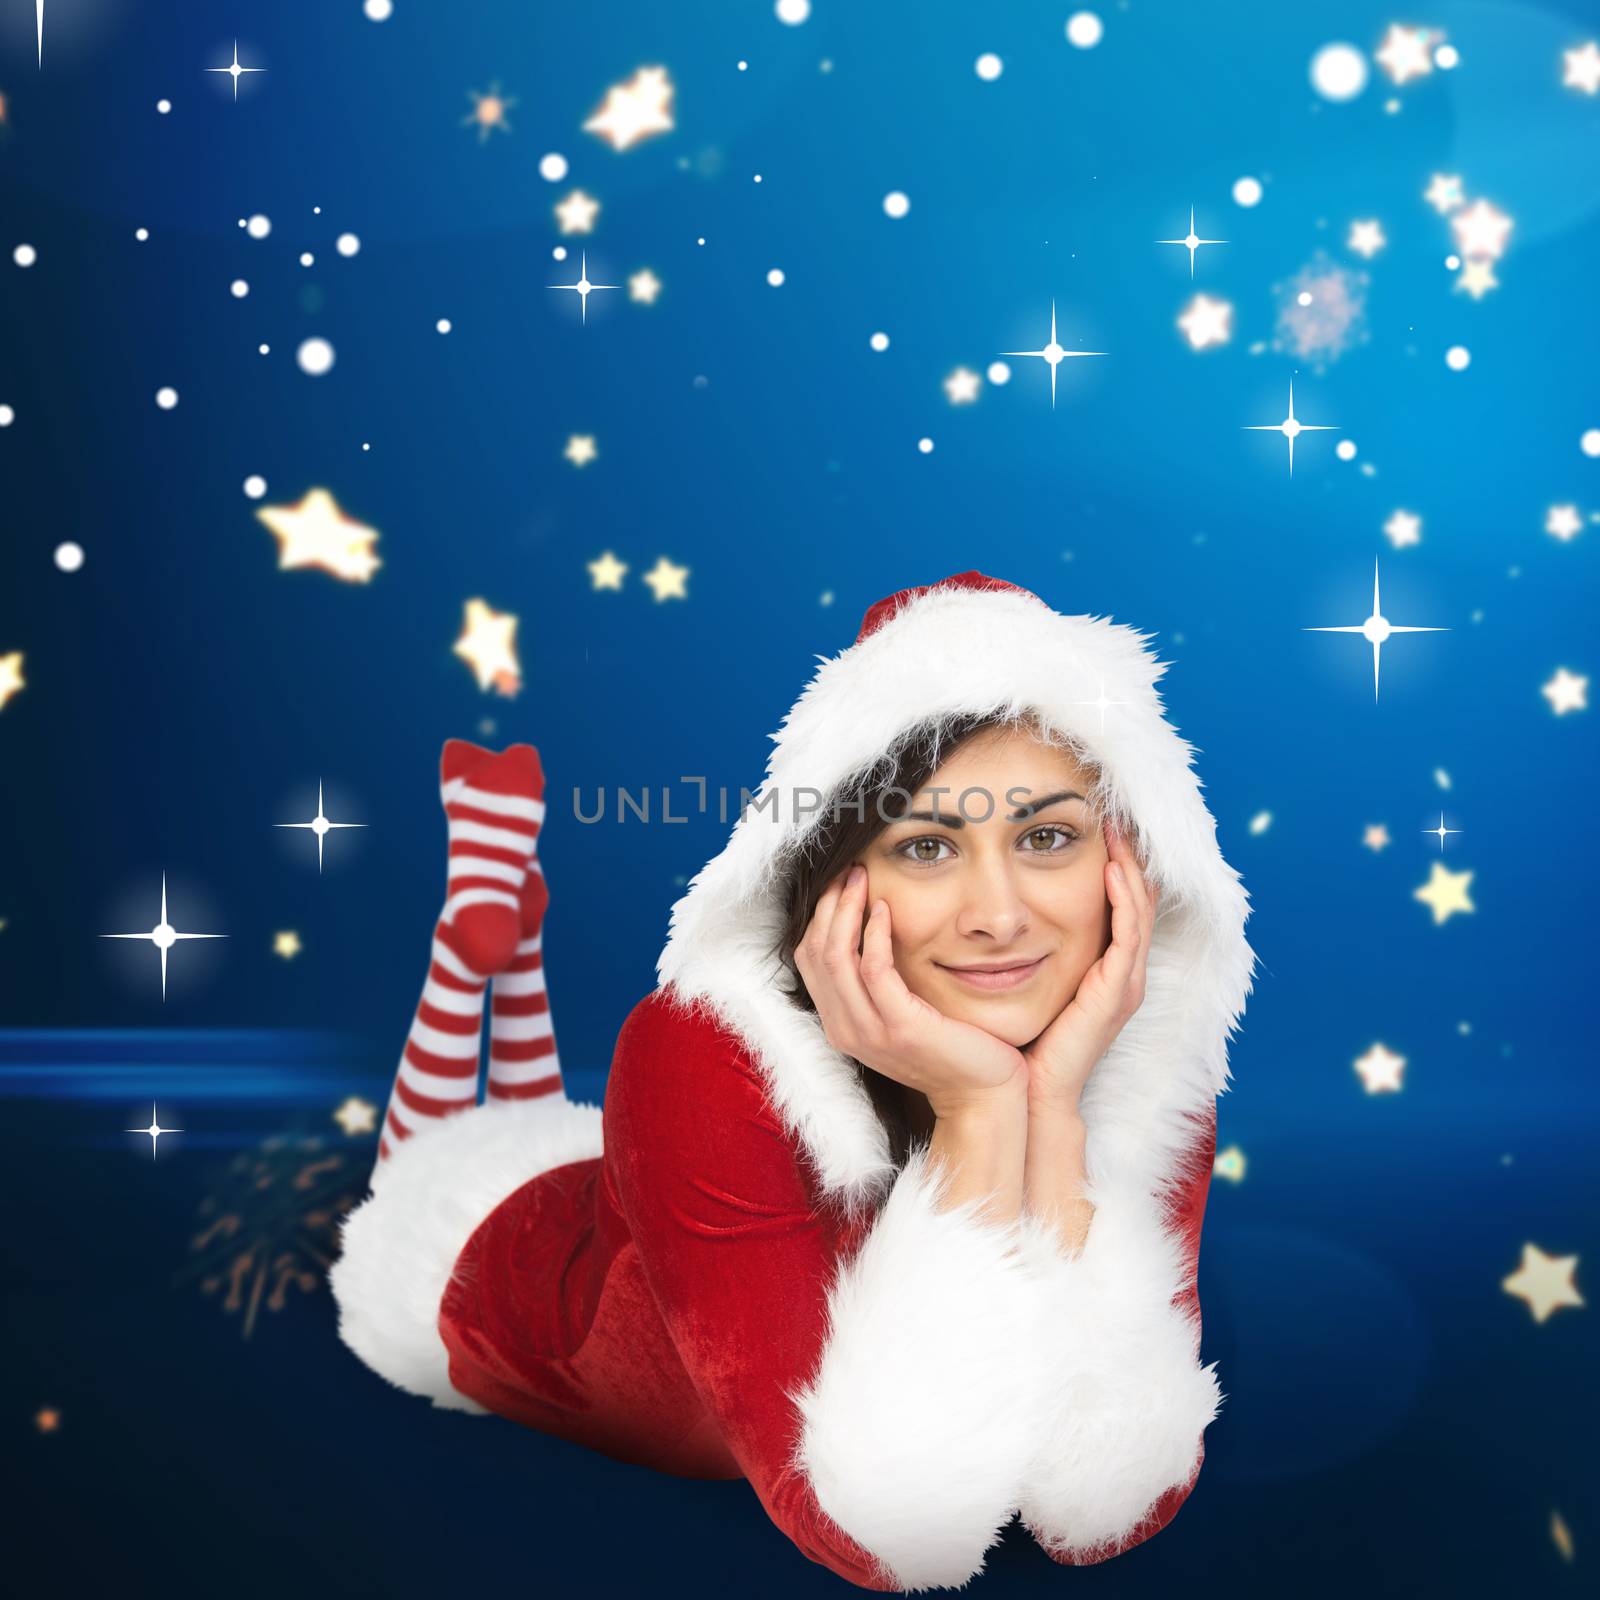 Pretty girl smiling in santa outfit against bright star pattern on blue